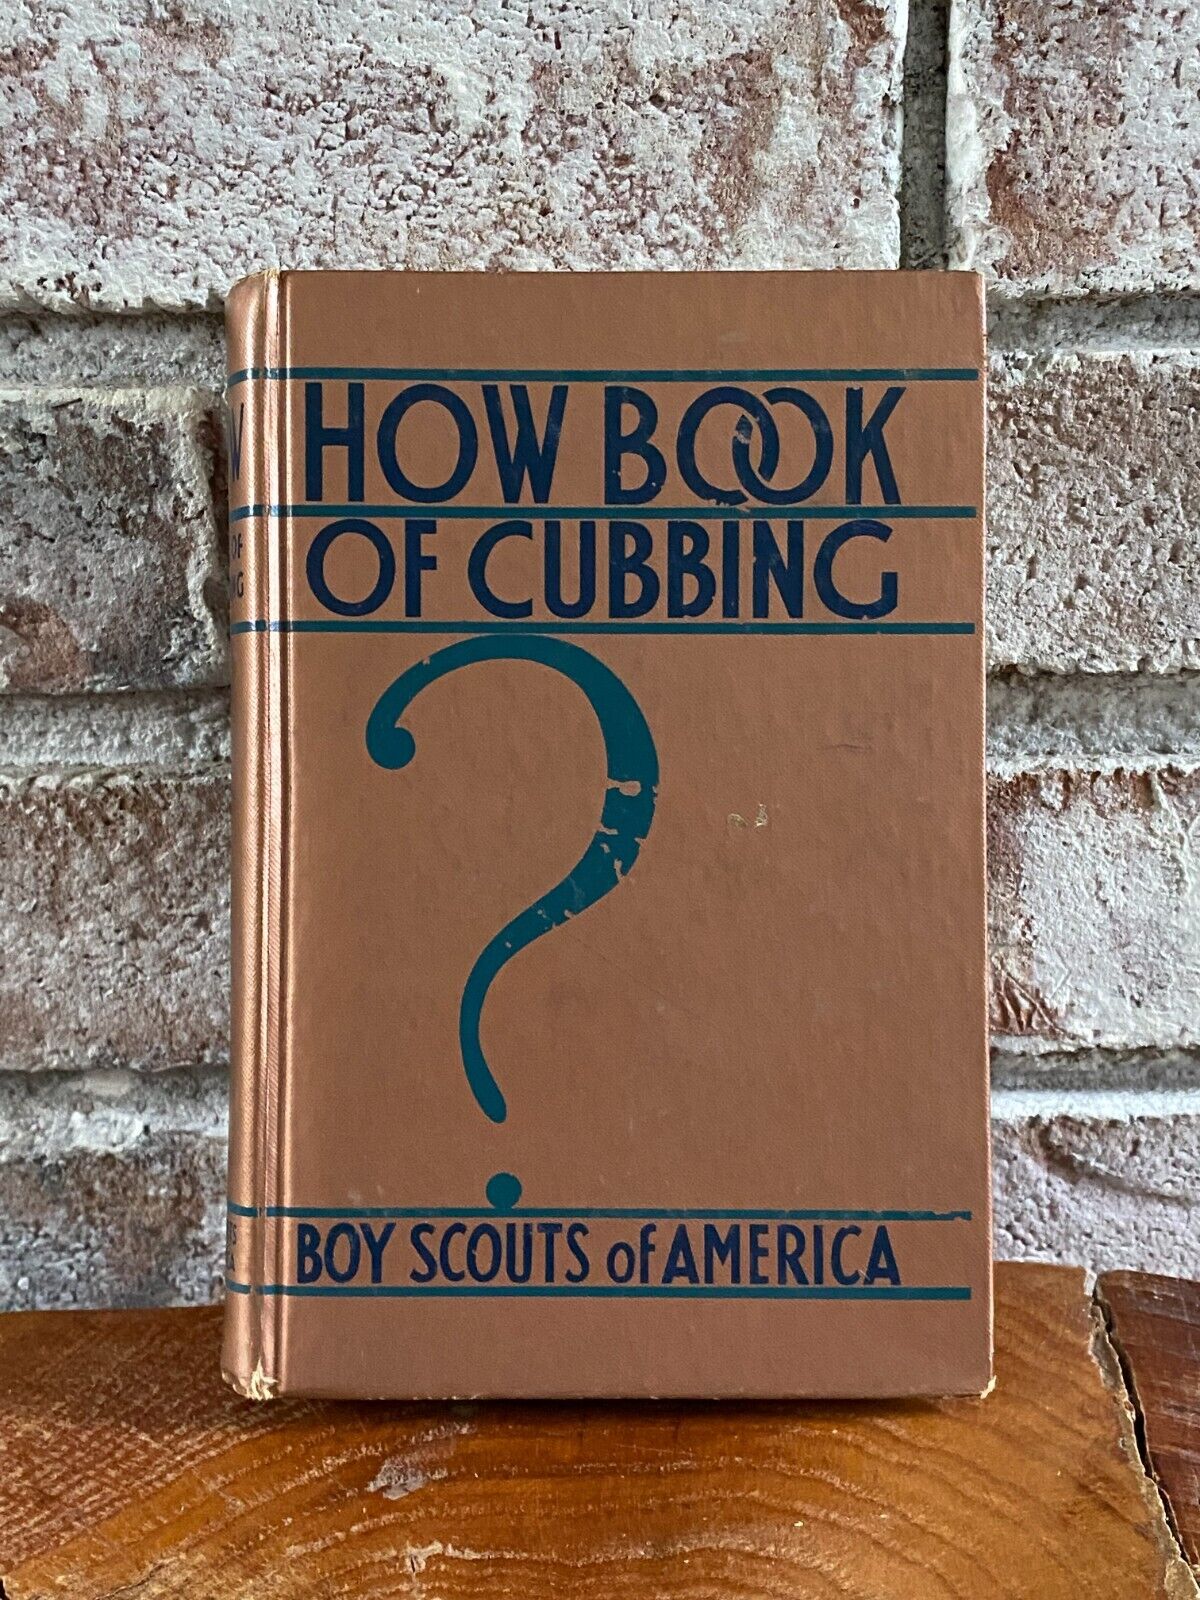 Vintage How Book of Cubbing - Boy Scouts of America - Hardcover Copyright 1941